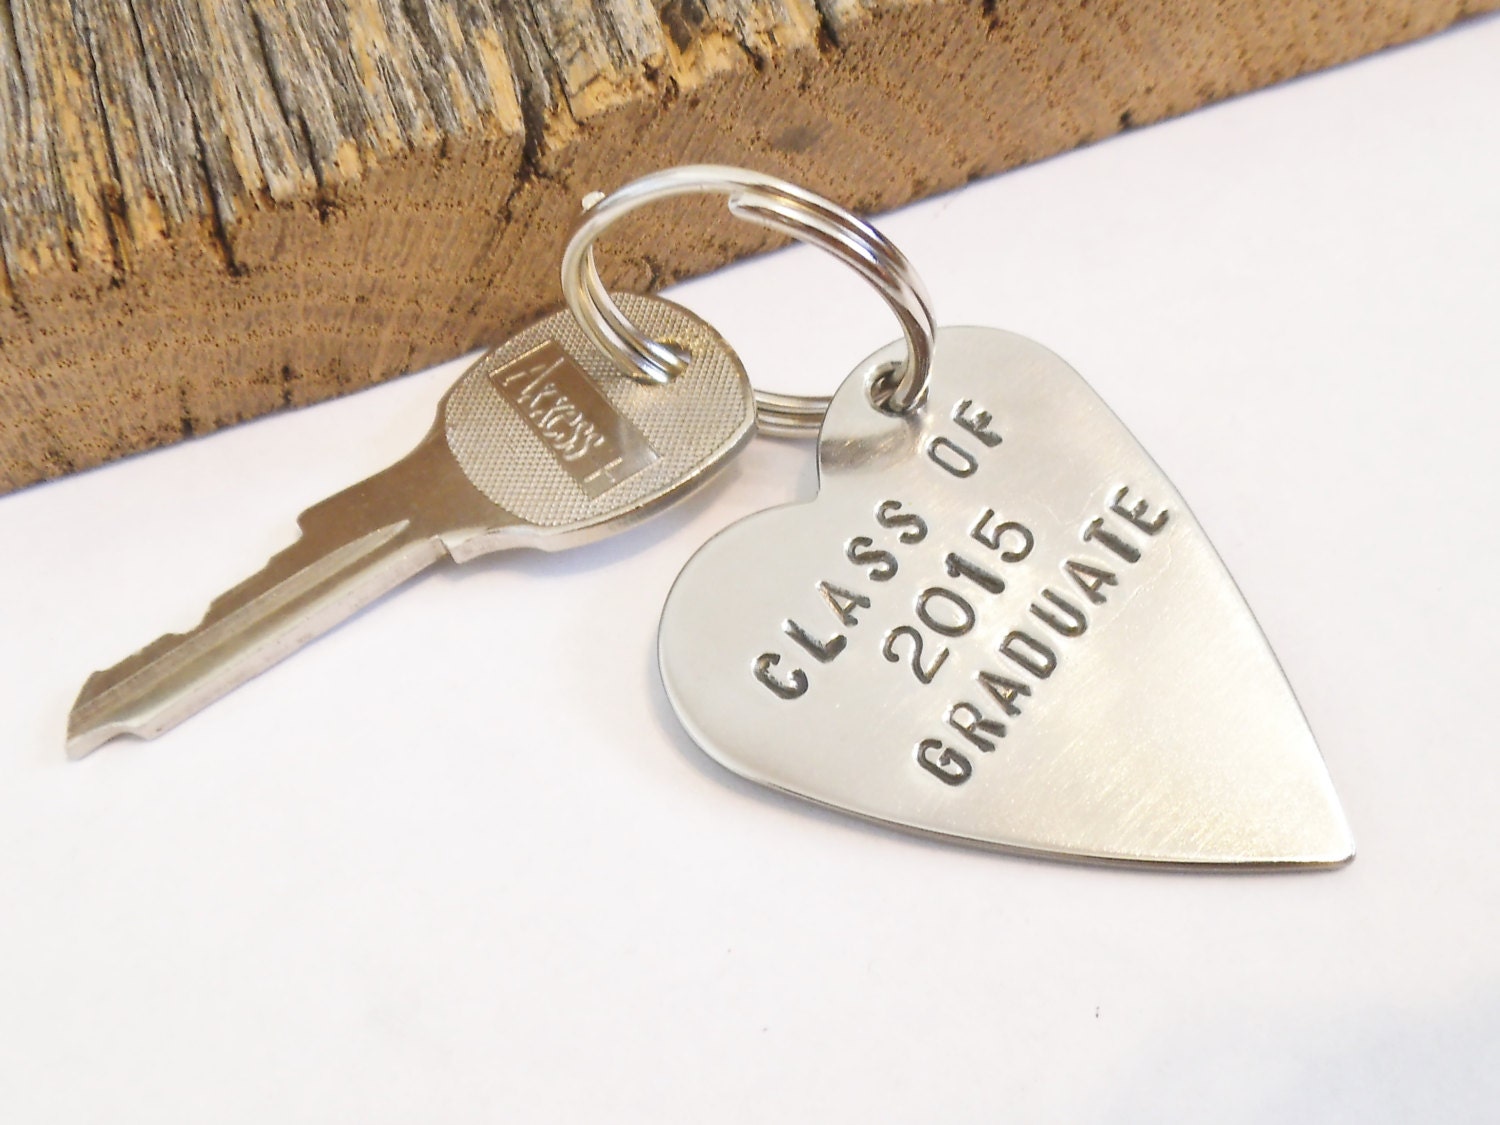 groomsmen gifts, for the groomsmen, personalized key chains